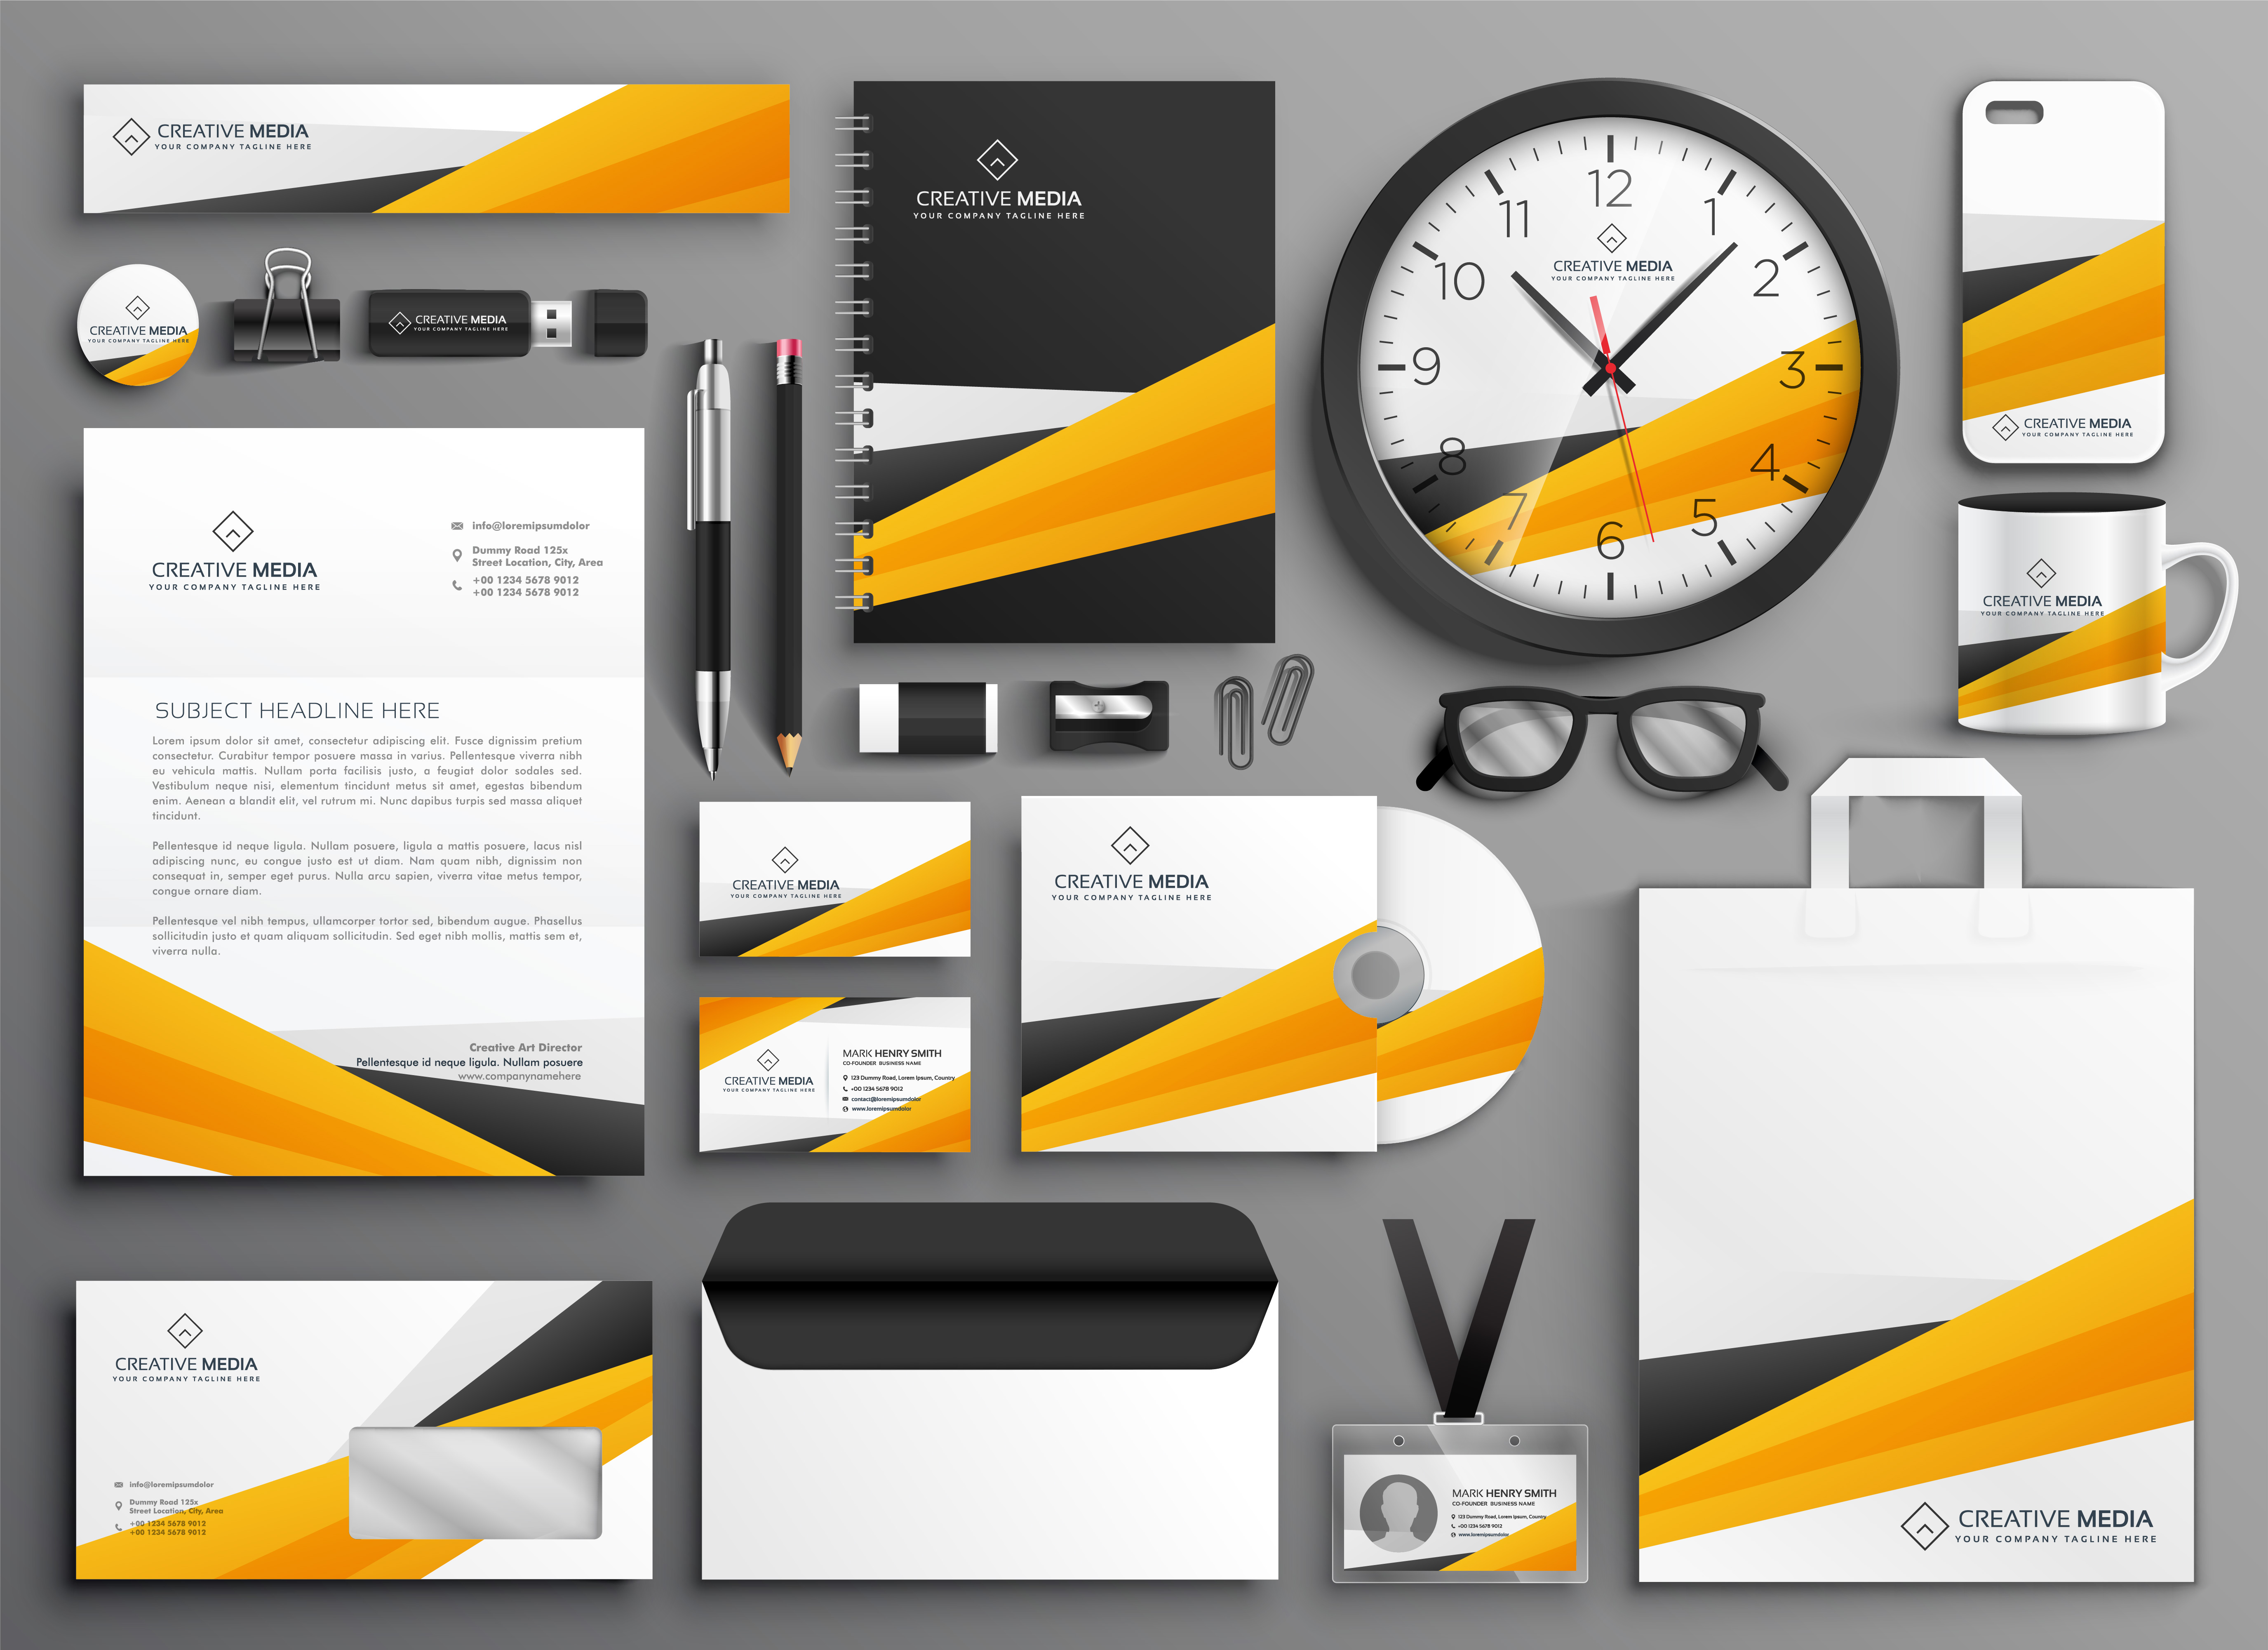 Download abstract yellow business stationery set - Download Free Vector Art, Stock Graphics & Images